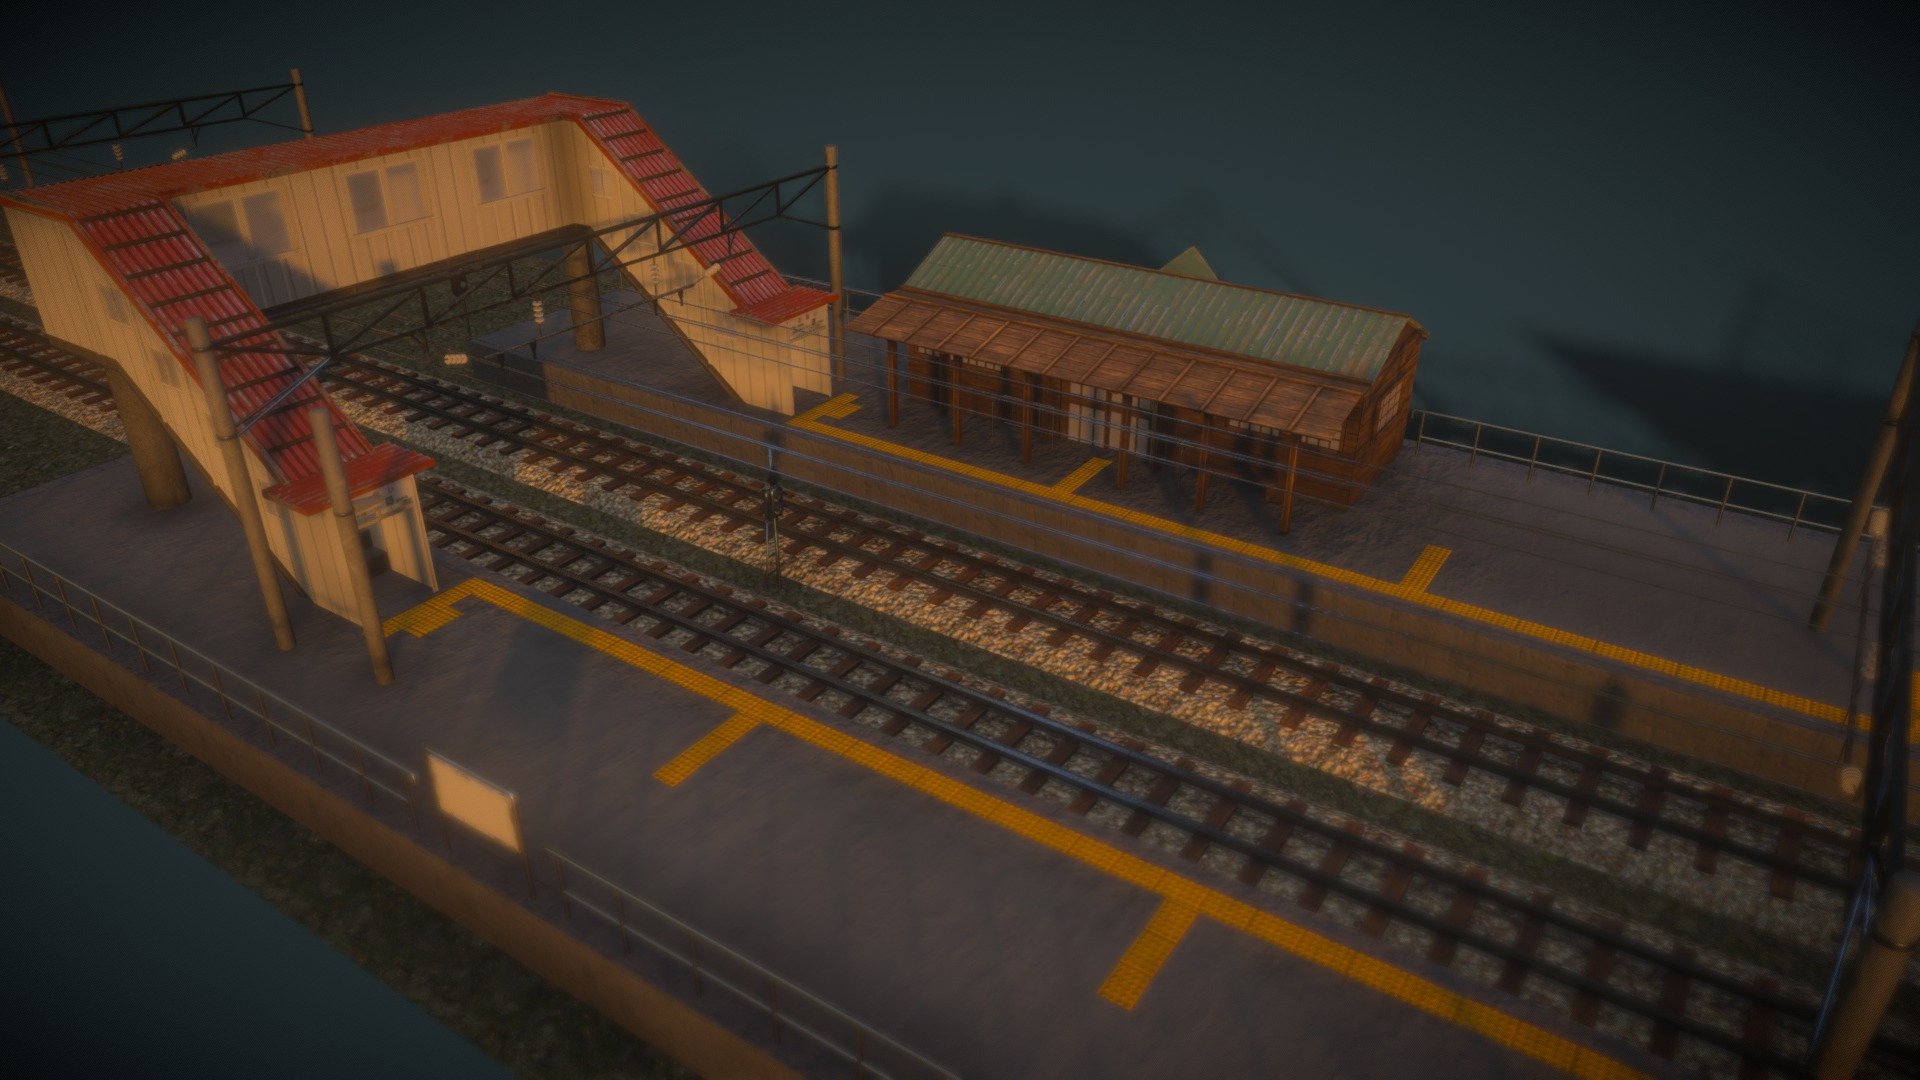 This railway station scene is from an animated movie &ldquo;The place promised in our early days